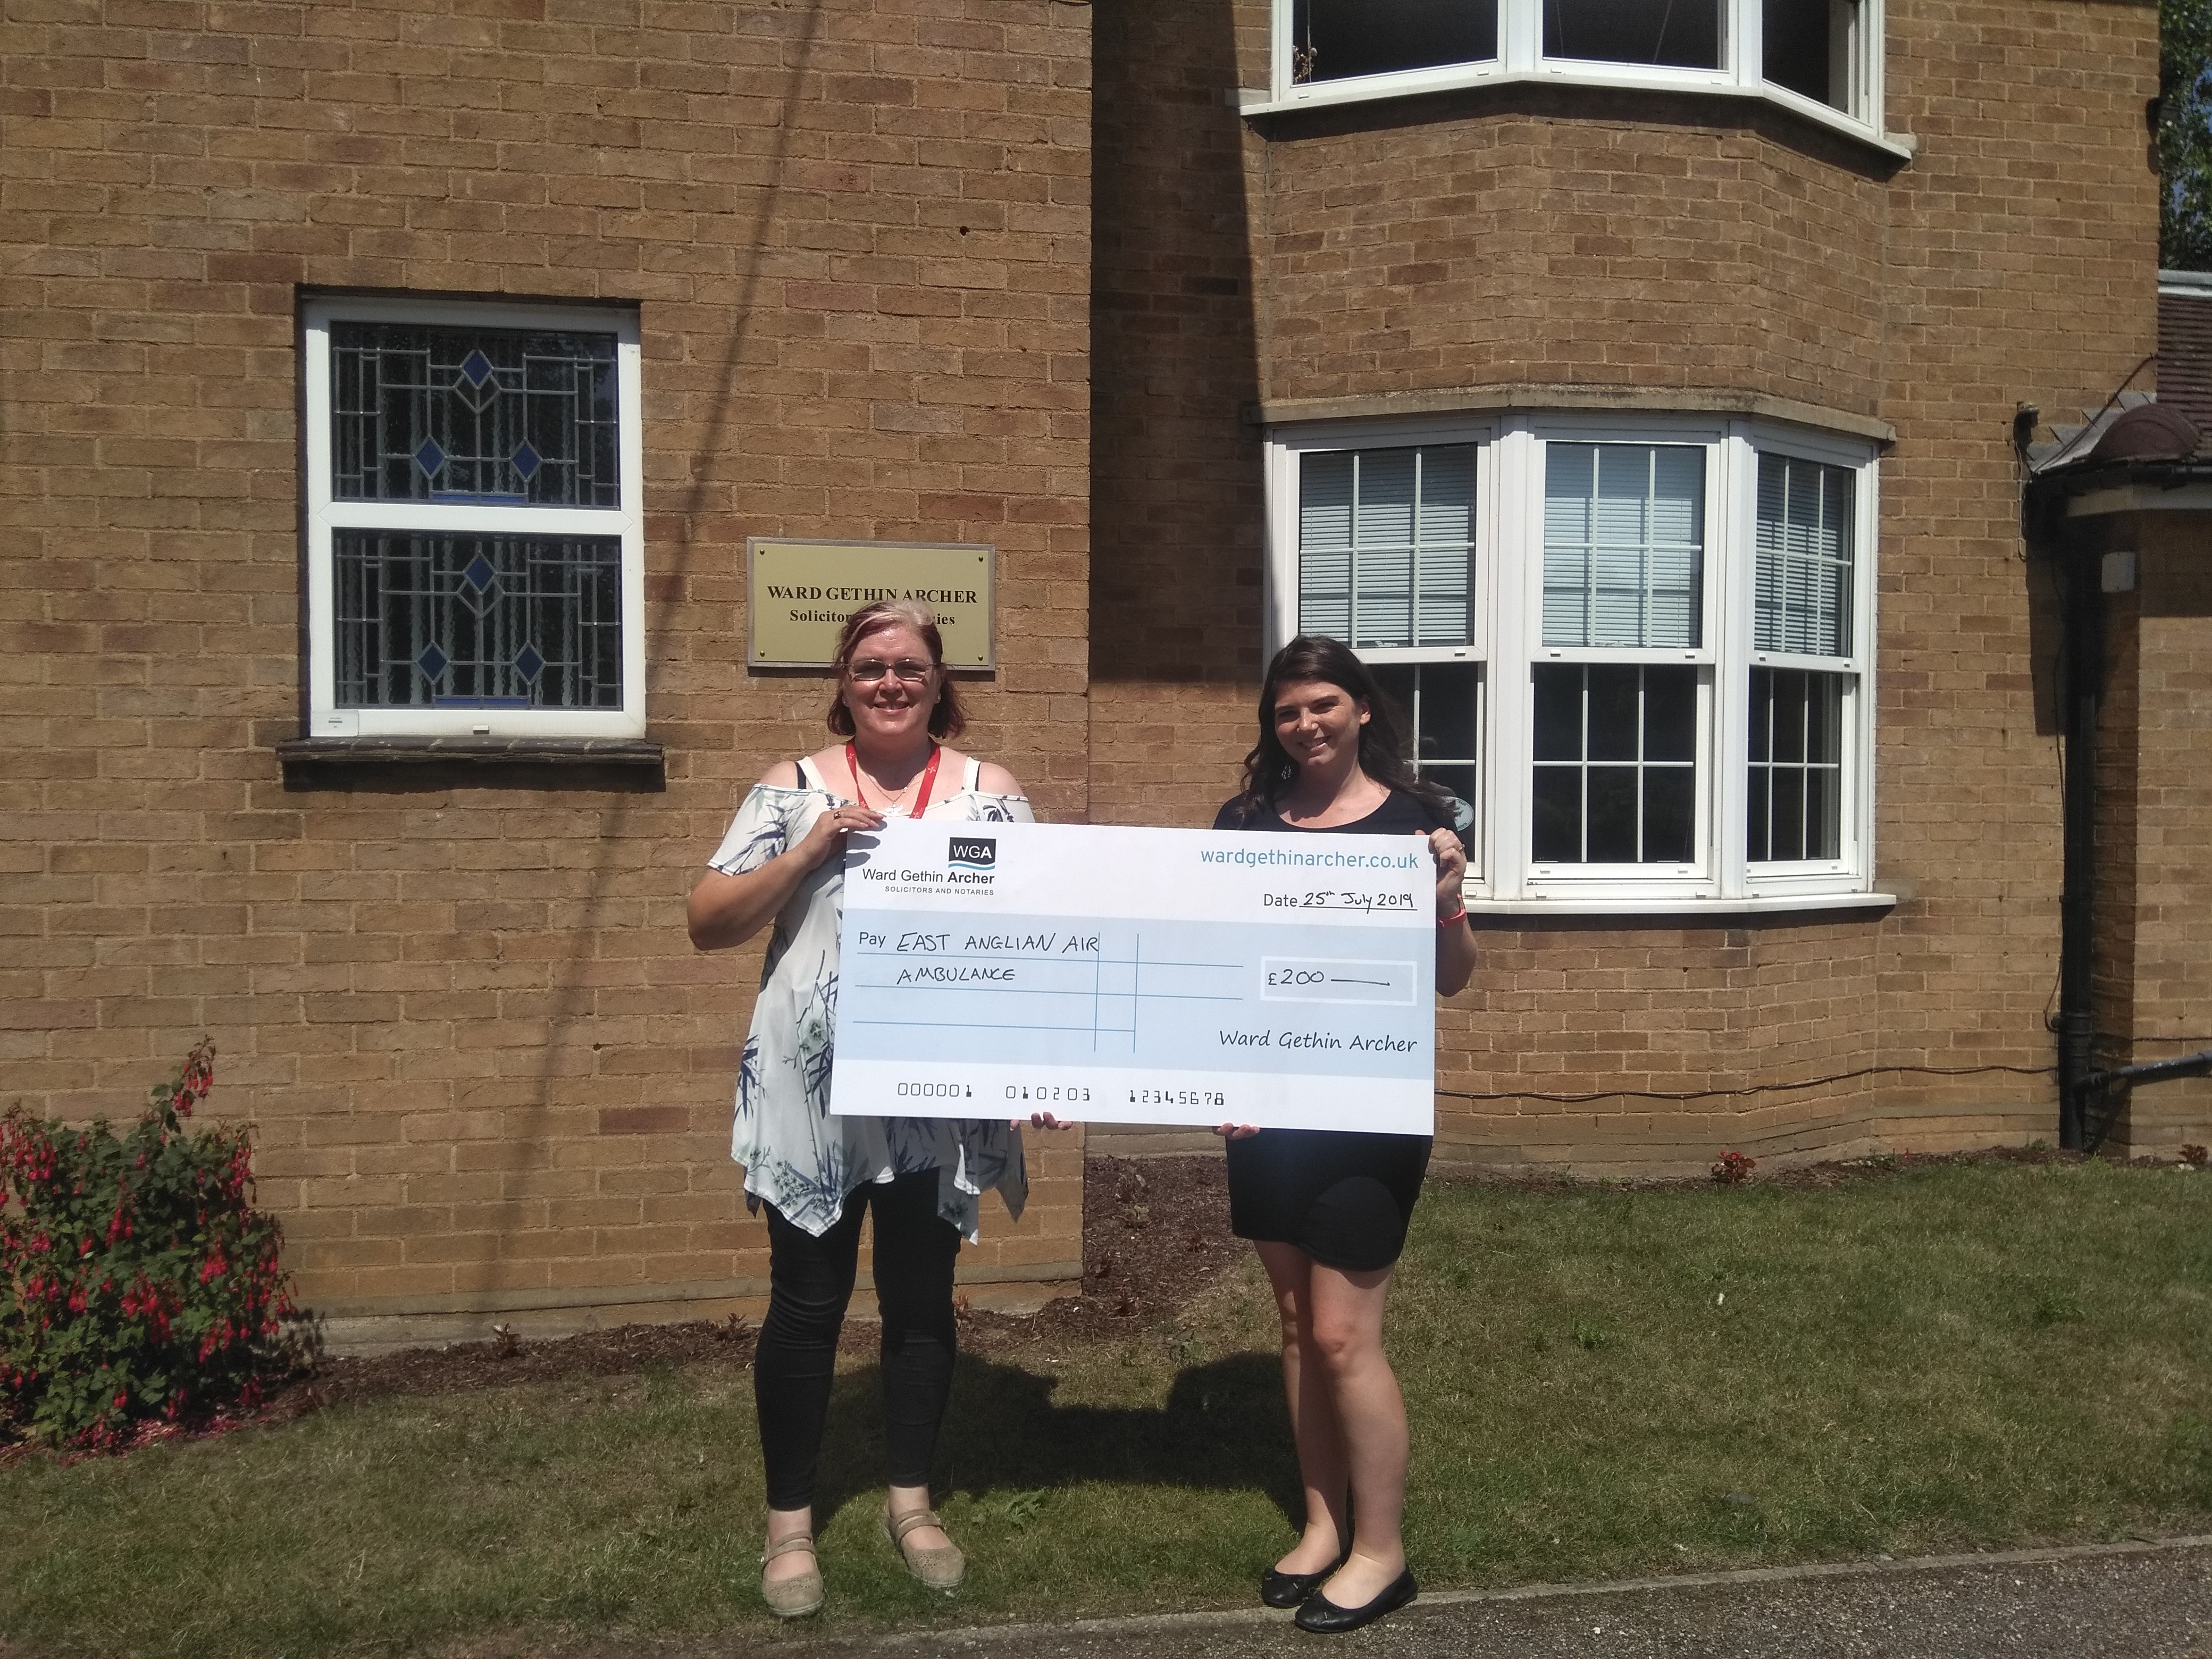 Chatteris office EAAA cheque presentation